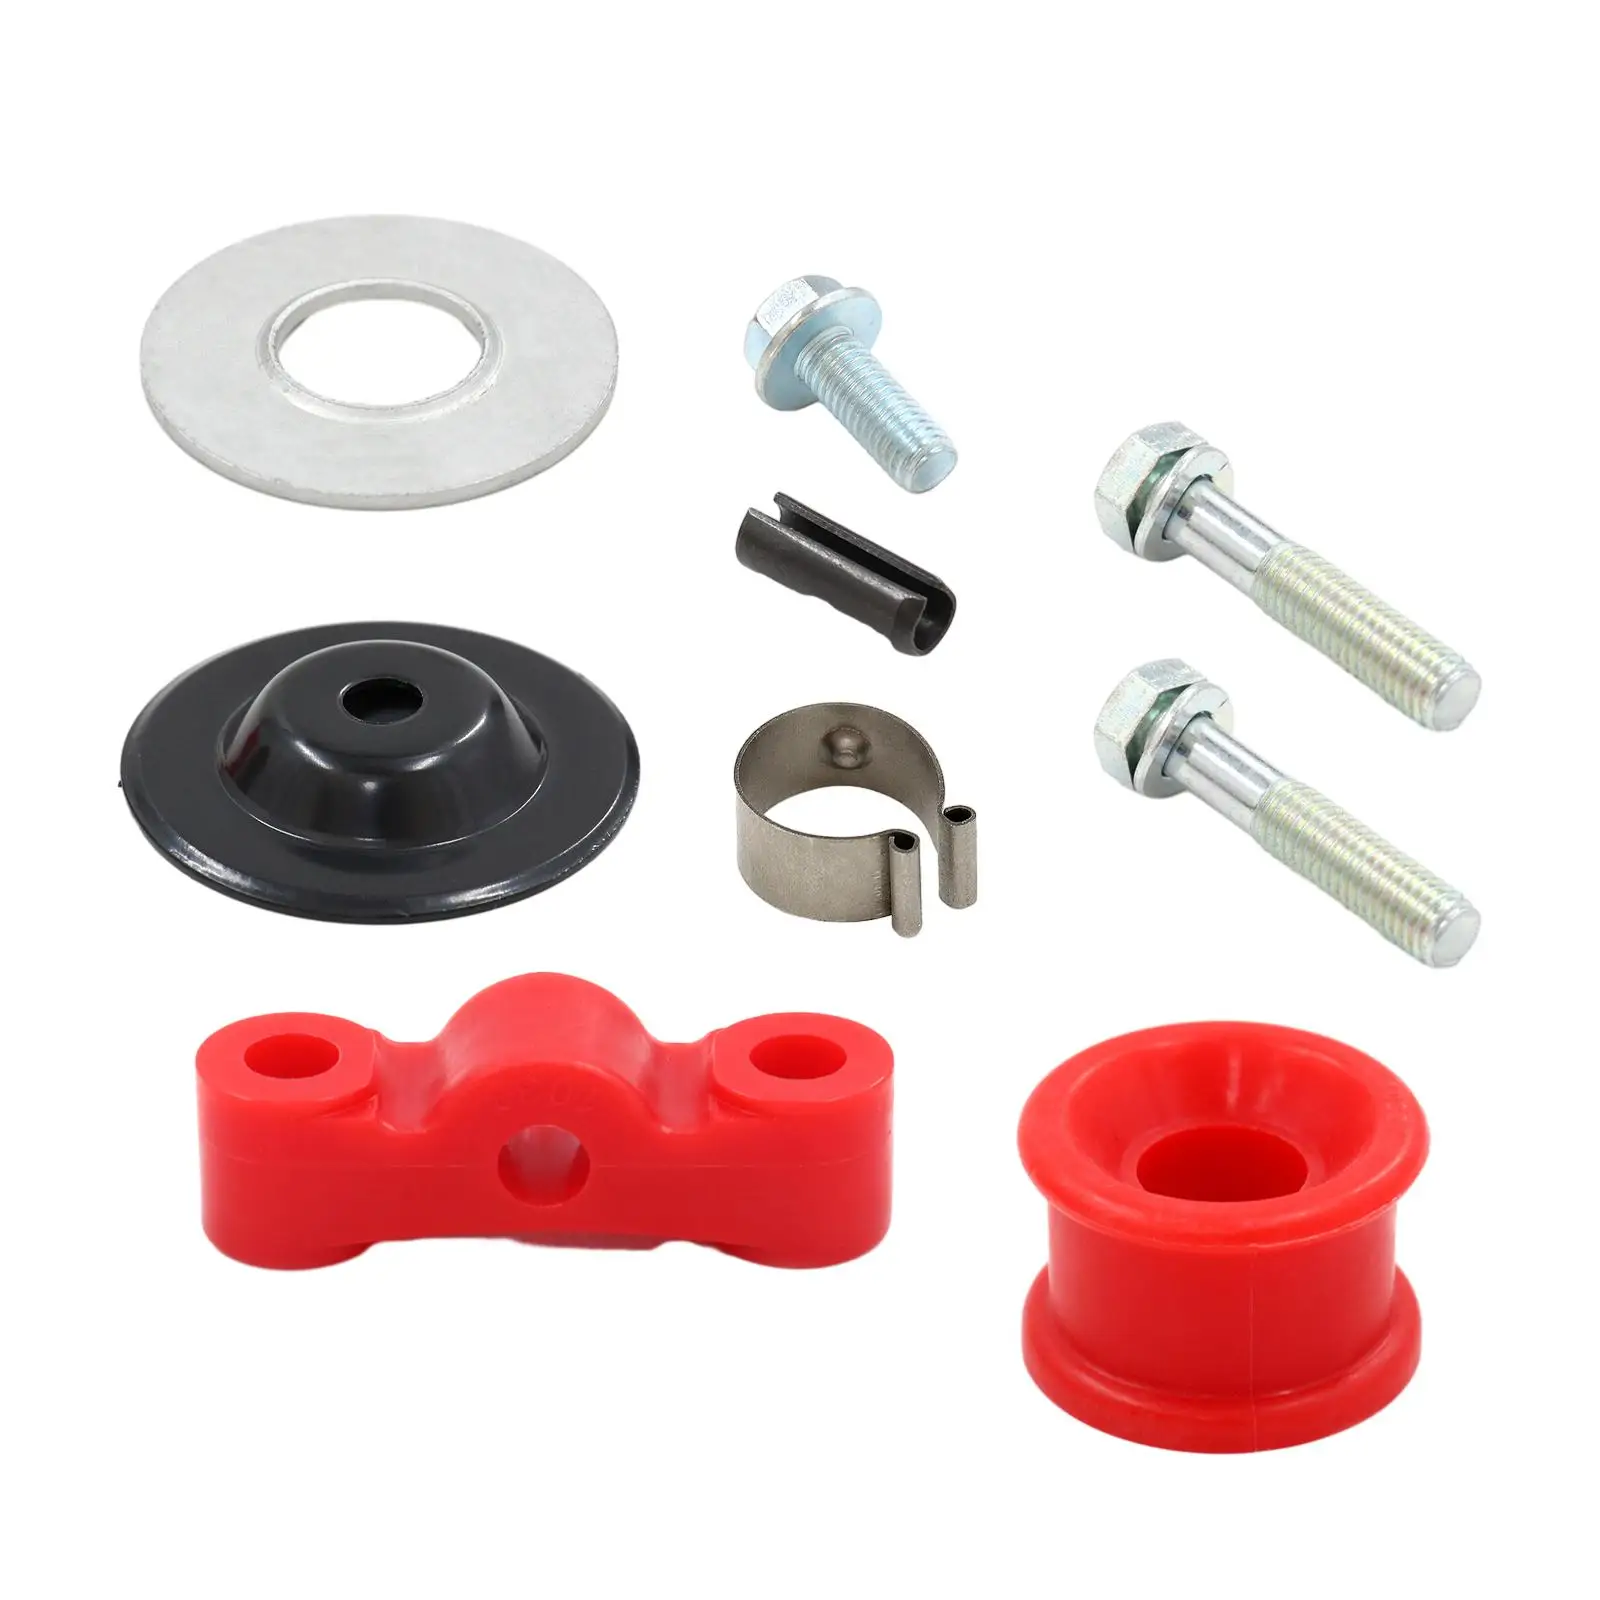 Red Shift Linkage Bushings Kit Replaces Auto Accessories C Clip and Bolt for Honda Civic Crx with B Series Swap Heavy Duty